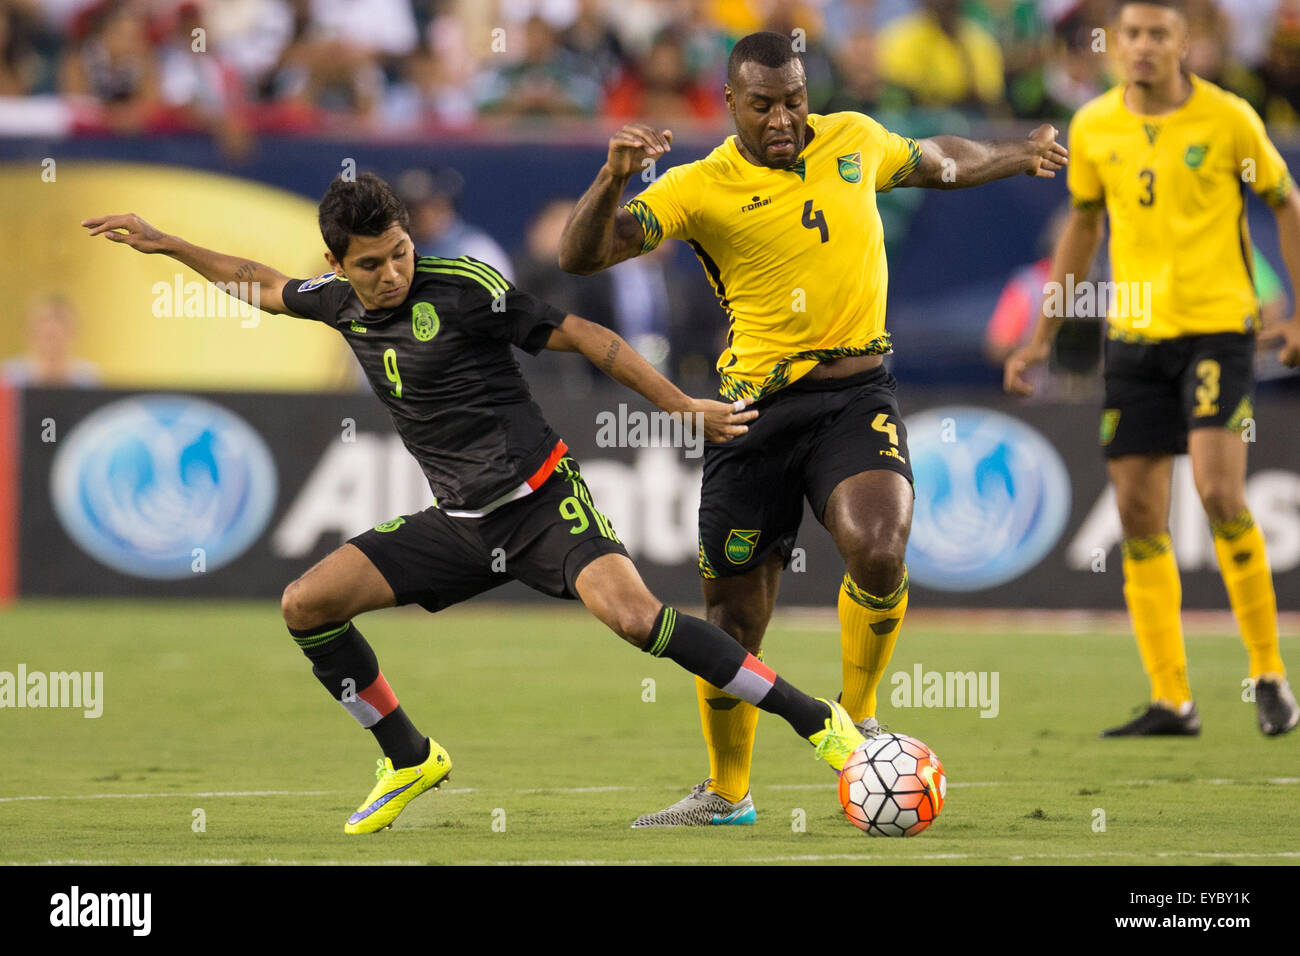 Philadelphia, Pennsylvania, USA. 26th July, 2015. Mexico forward Jesus Corona (9) battles with Jamaica defender Wes Morgan (4) for the ball during the CONCACAF Gold Cup 2015 Final match between Jamaica and Mexico at Lincoln Financial Field in Philadelphia, Pennsylvania. Christopher Szagola/CSM/Alamy Live News Stock Photo